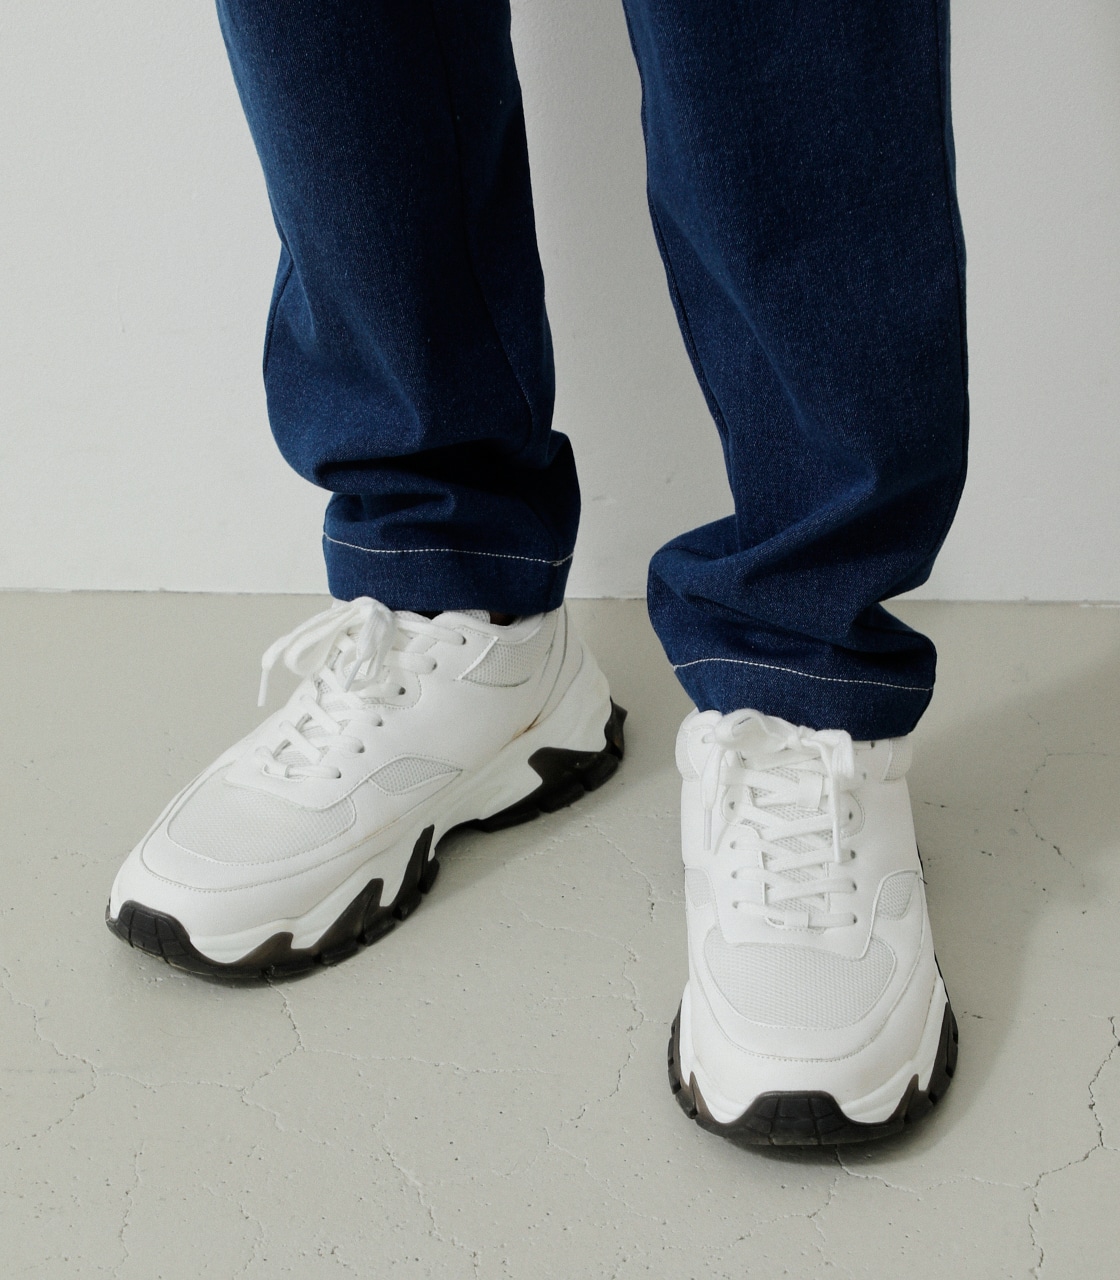 2TONE SOLE DAD SNEAKERS/2トーンソールDADスニーカー 詳細画像 WHT 7